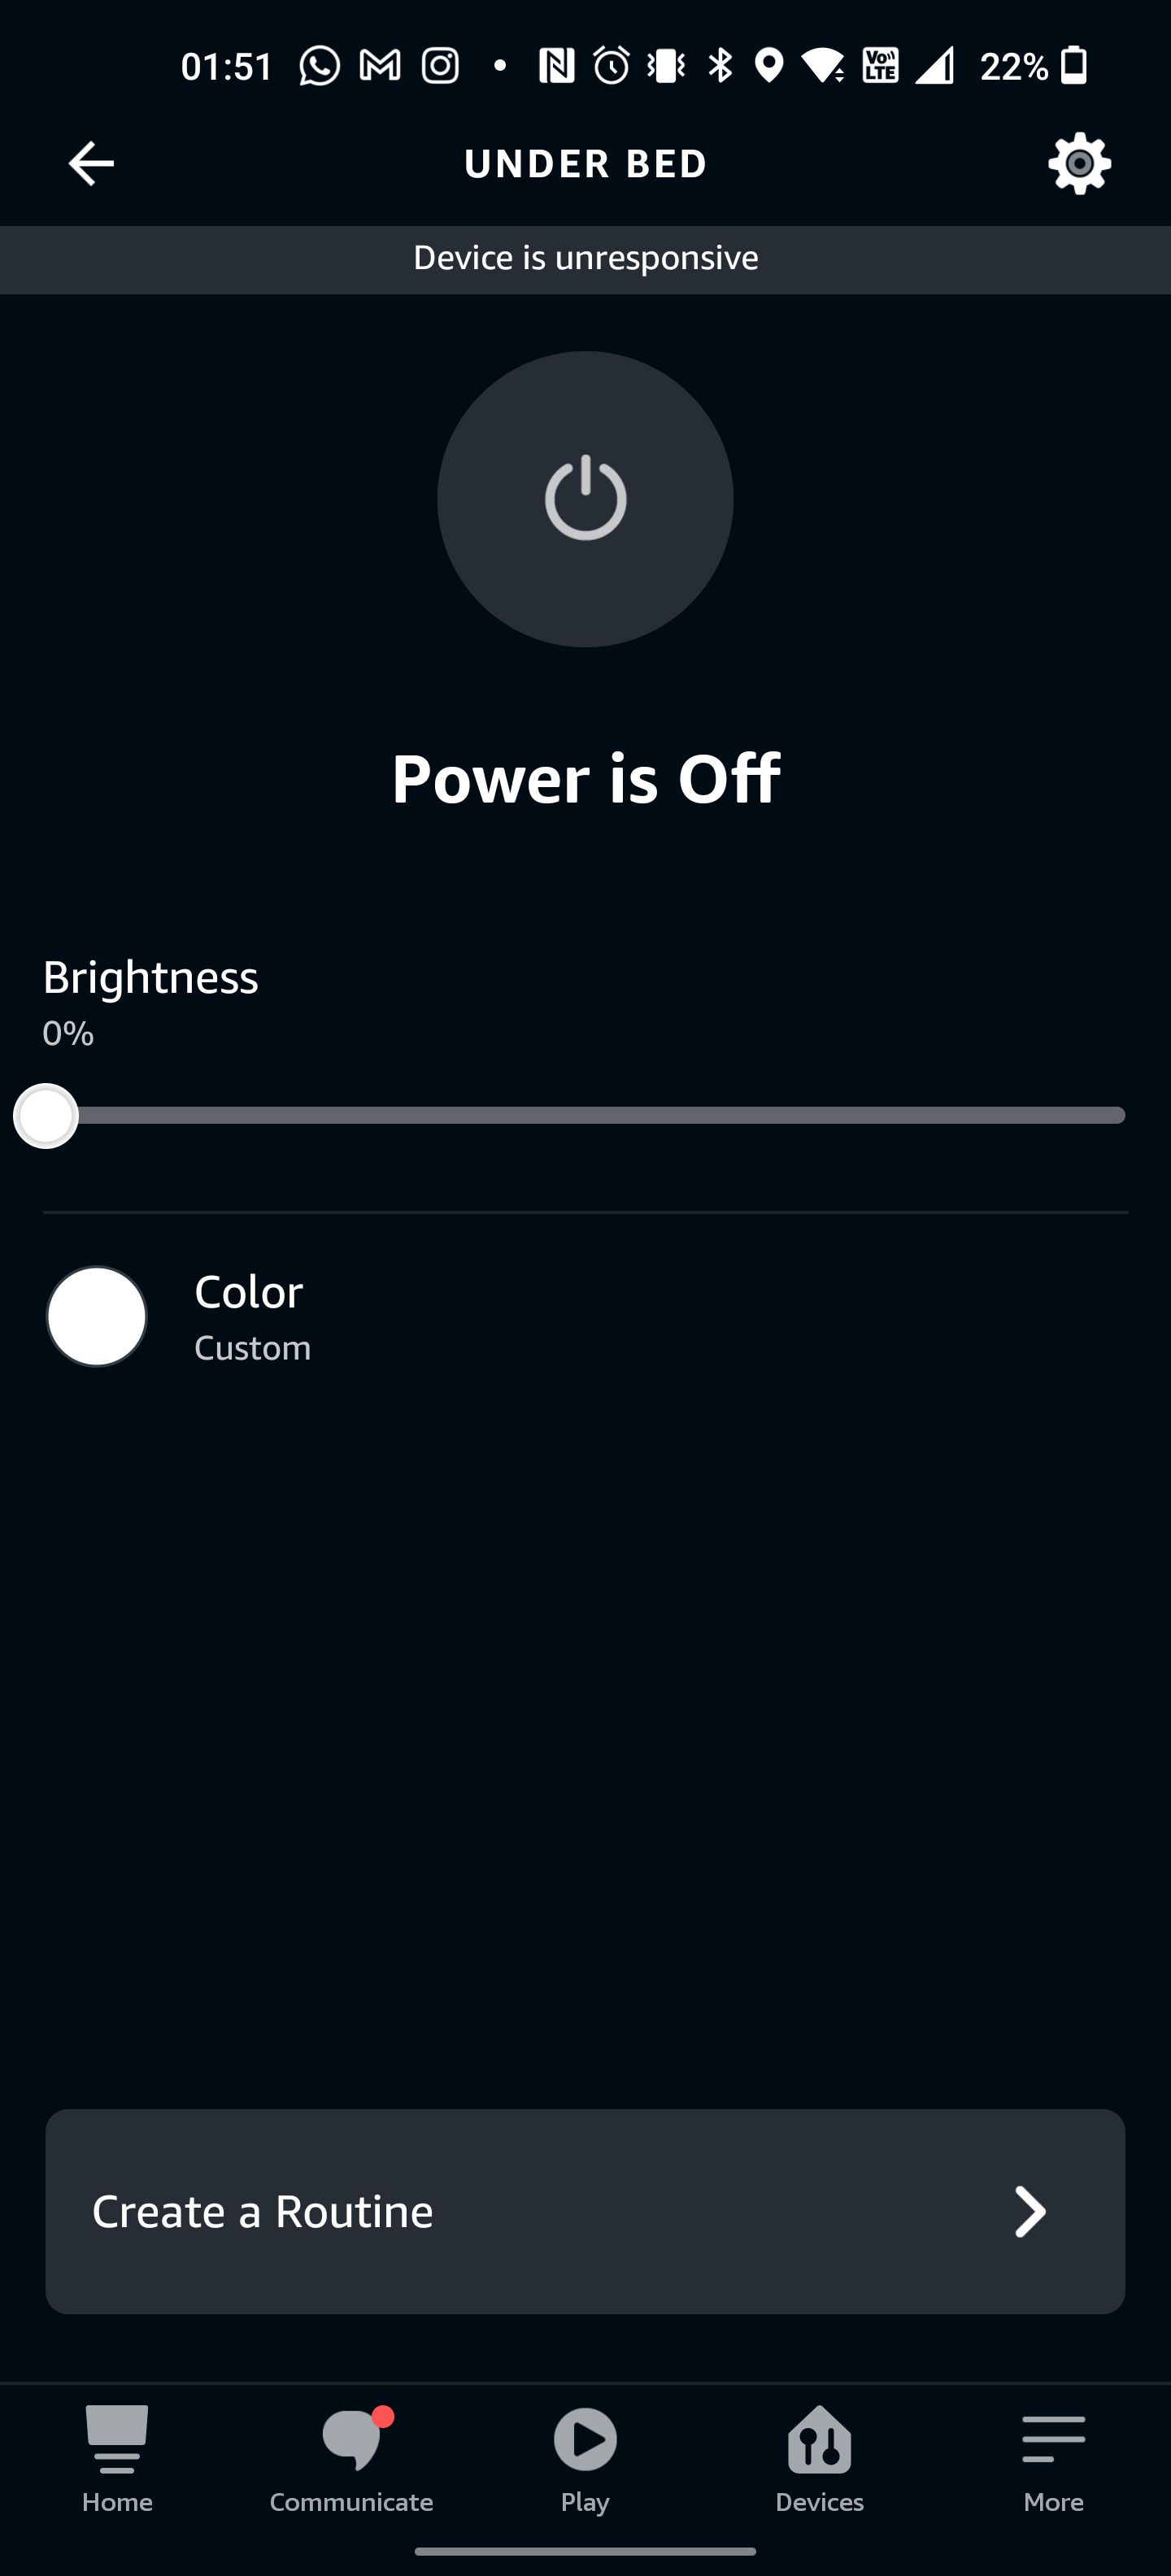 The Alexa app showing a power button for a smart bulb.